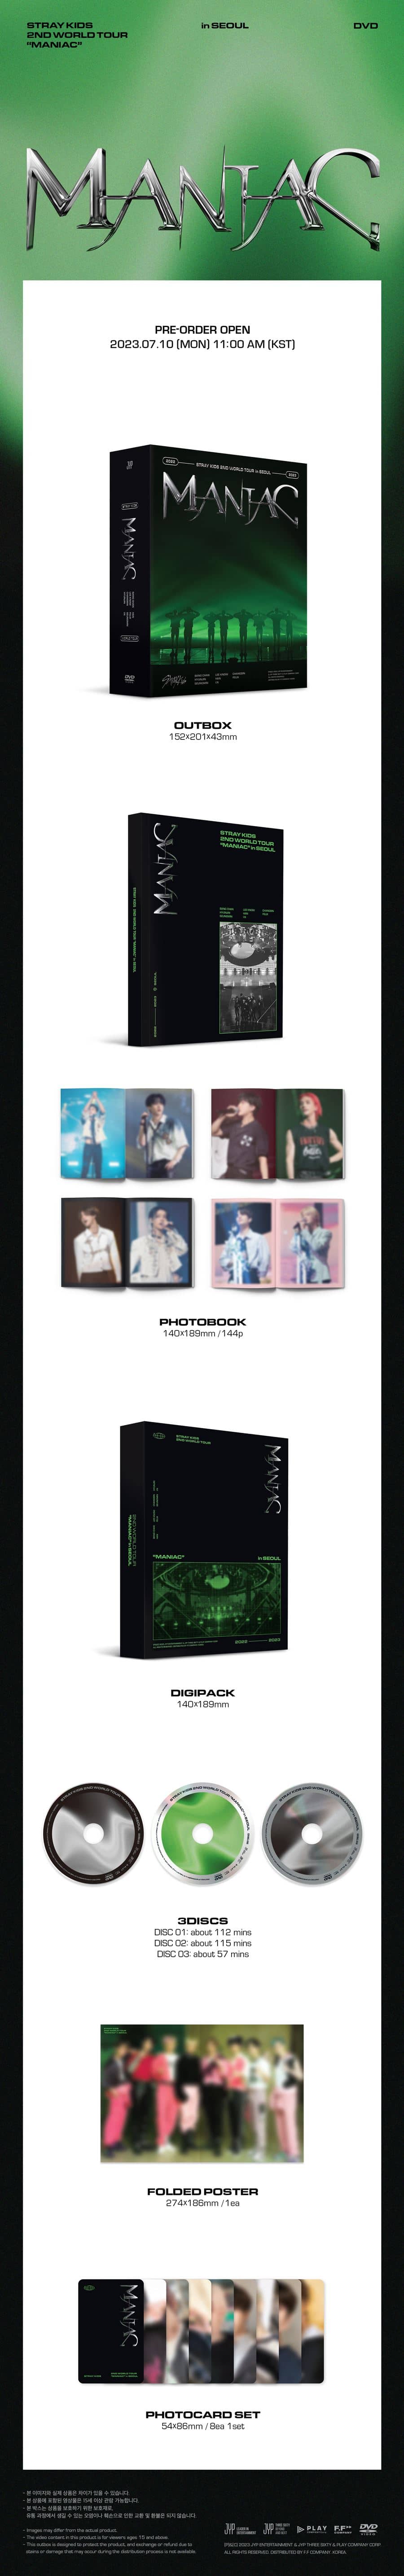 stray-kids-second-world-tour-maniac-in-seoul-dvd-wholesales